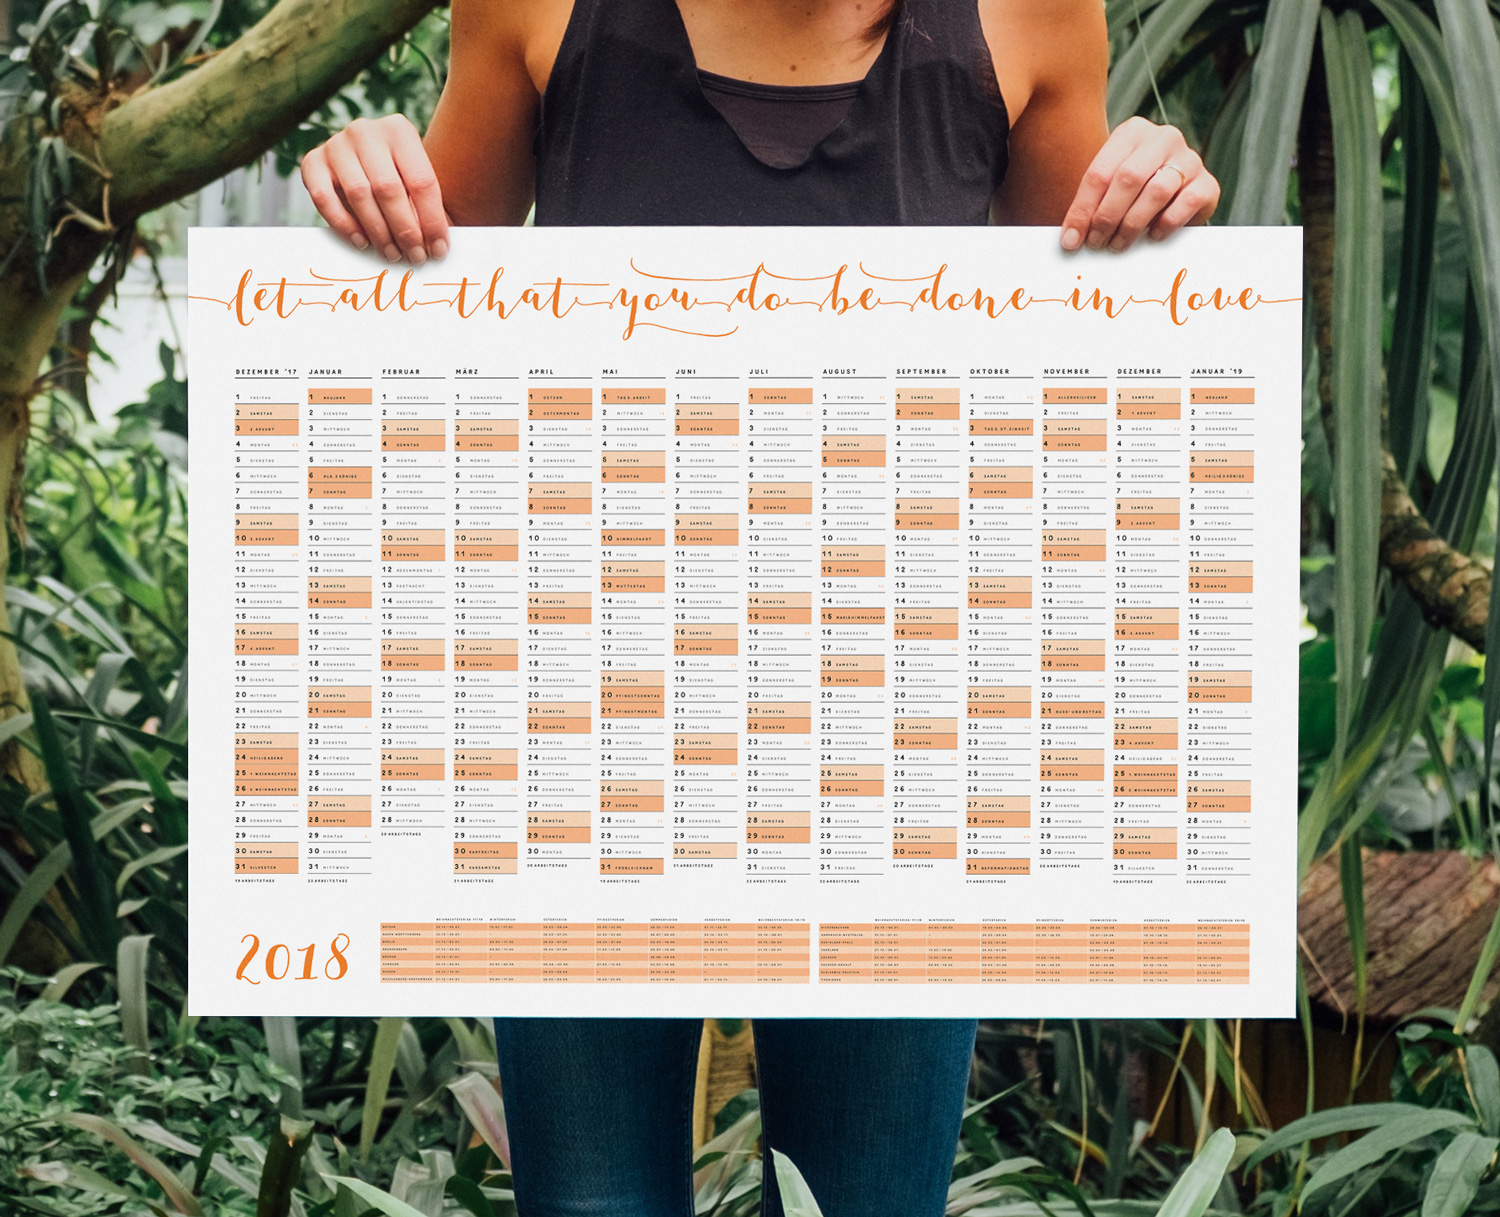 All-year wall calendar in German language. It was set in two colors in Mila Script and Mila Sans and includes day digits and names, the German holidays and the number of working days per month. At the bottom is a table of German holidays, sorted by state